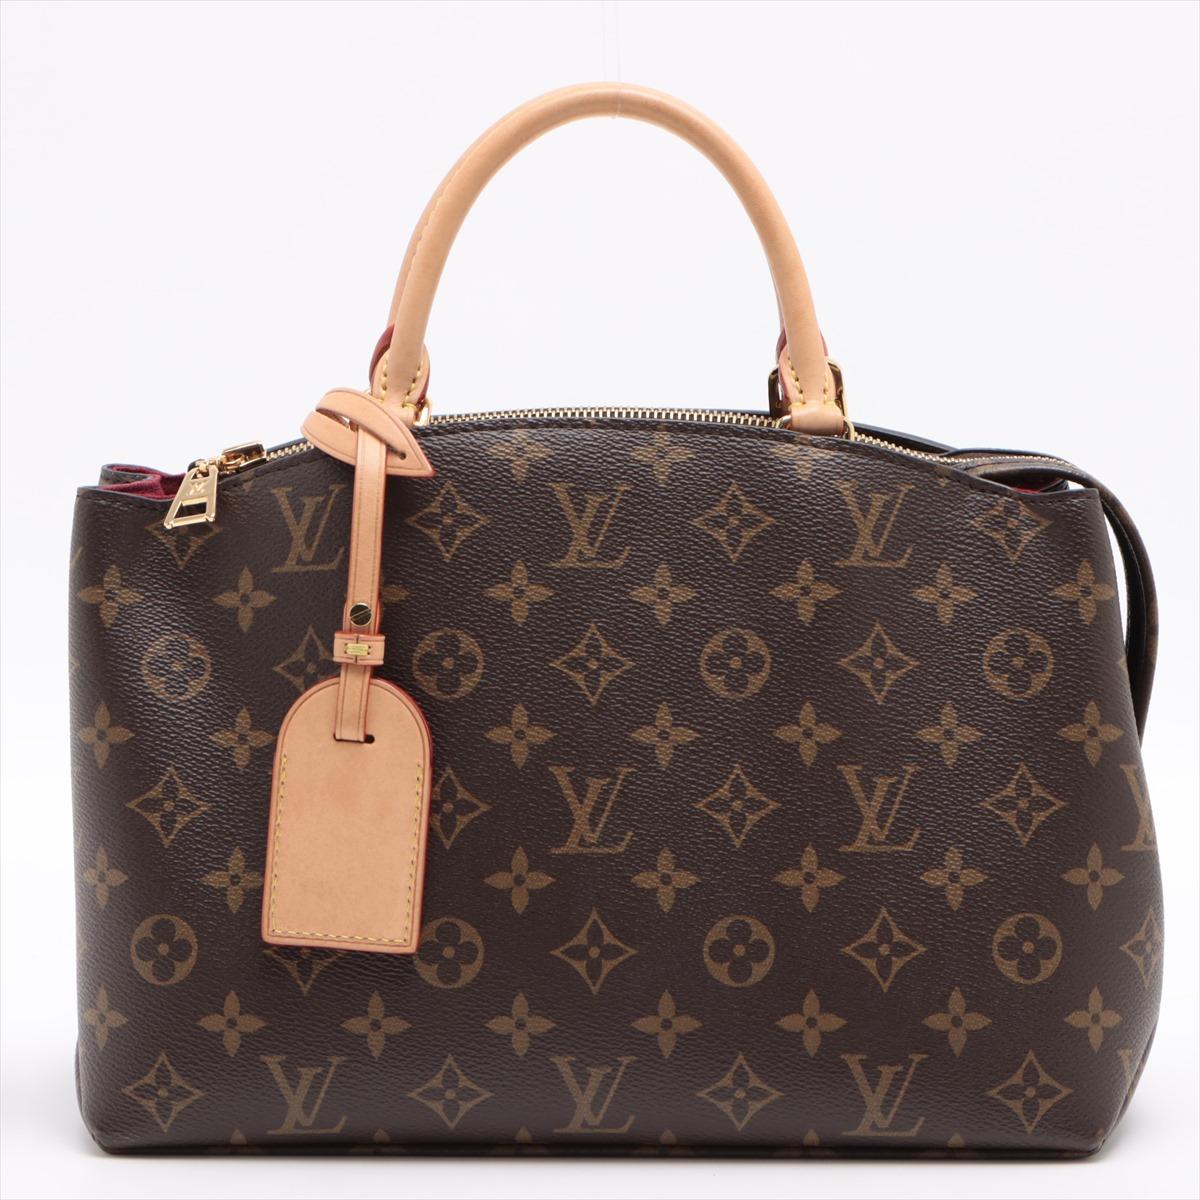 The Louis Vuitton Monogram Petit Palais PM is a fashion masterpiece that epitomizes the brand's heritage of elegance and craftsmanship. Crafted from Louis Vuitton's iconic Monogram canvas, the bag is a testament to timeless luxury. The Monogram